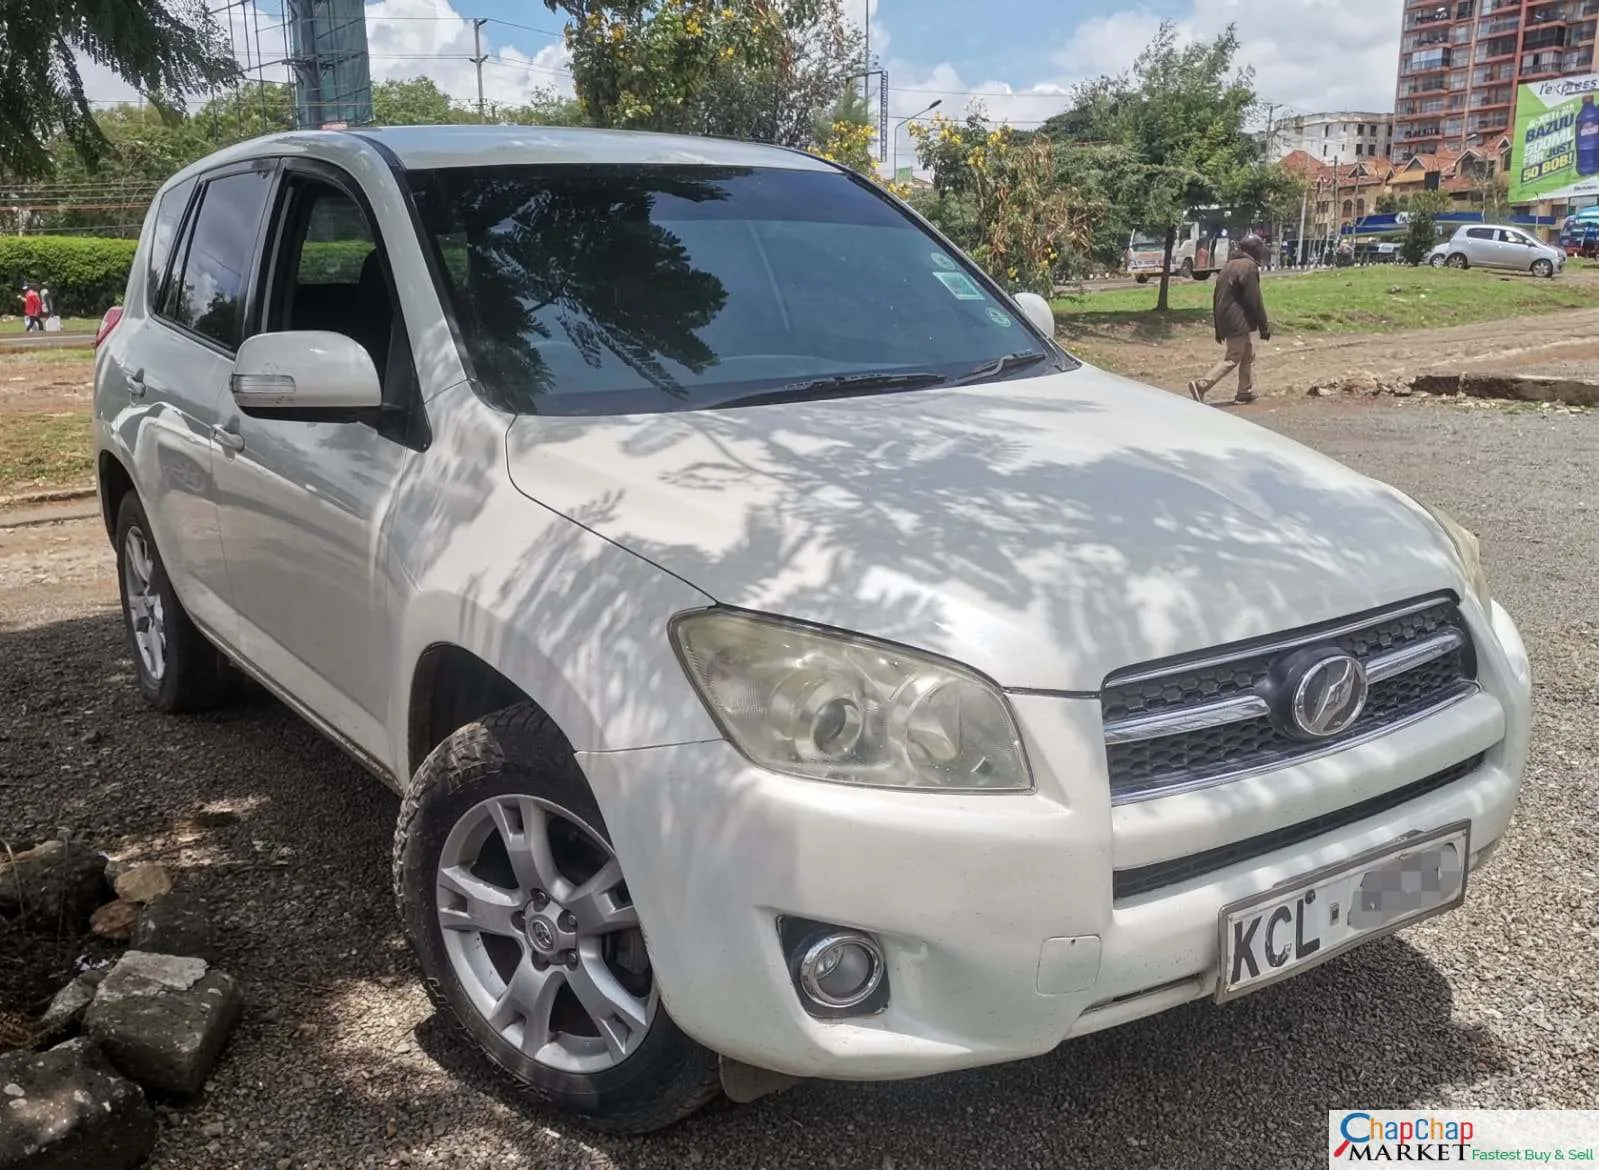 Cars Cars For Sale/Vehicles-Toyota RAV4 CHEAPEST You Pay 30% Deposit installments Trade in OK EXCLUSIVE 7